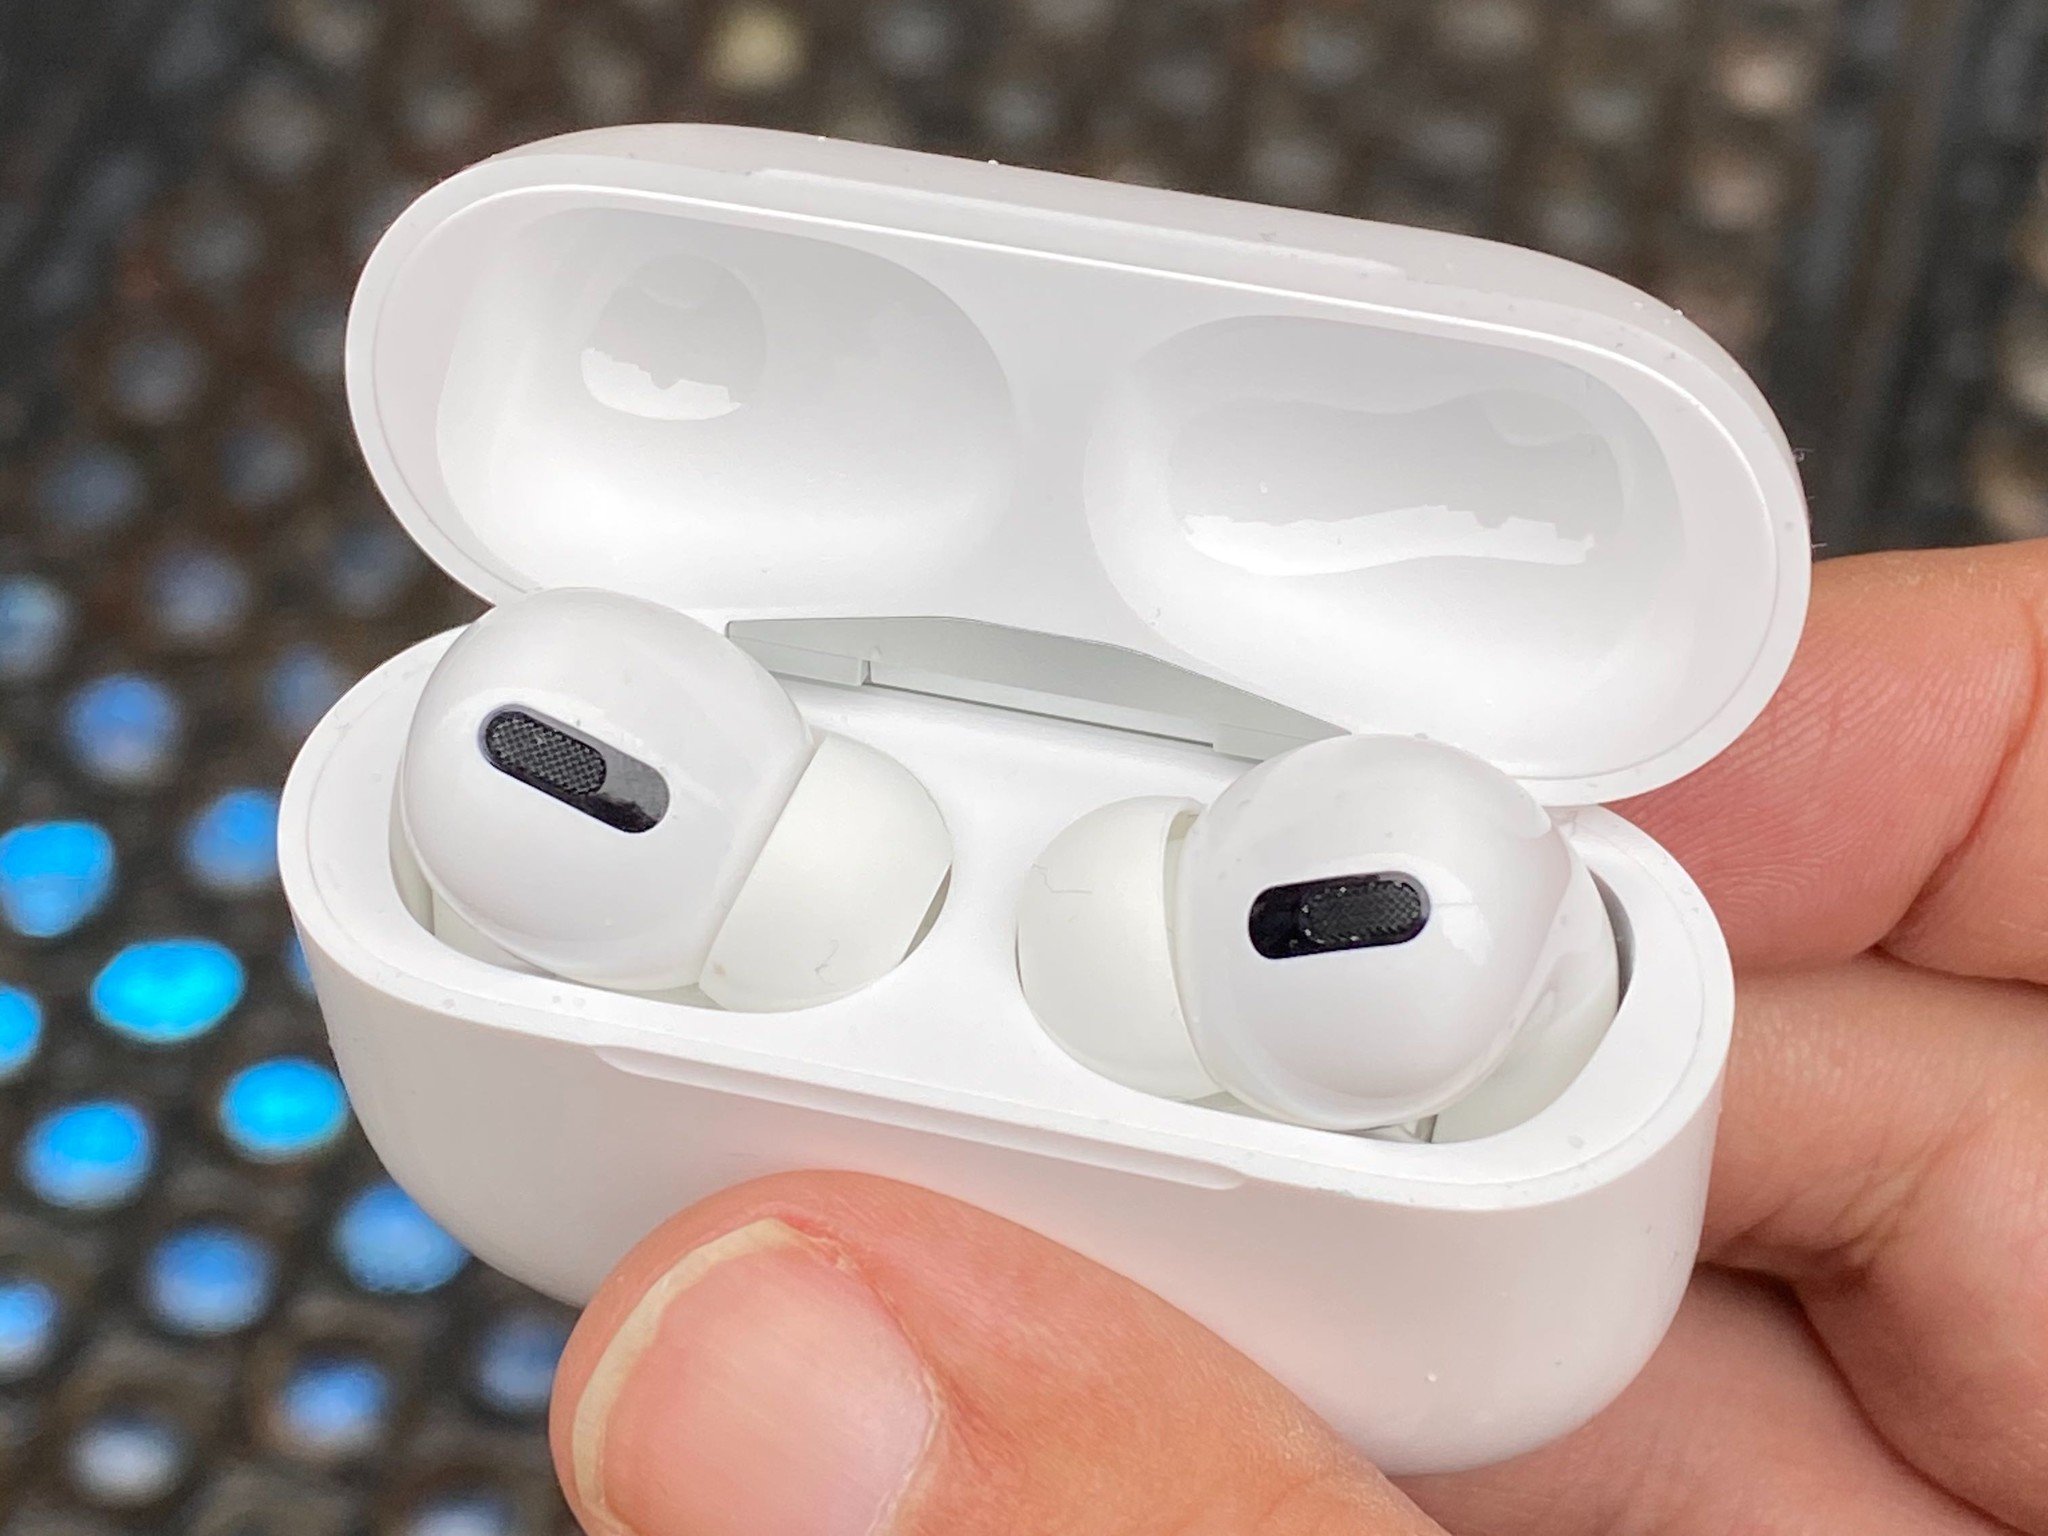 How to customize the AirPods Pro controls